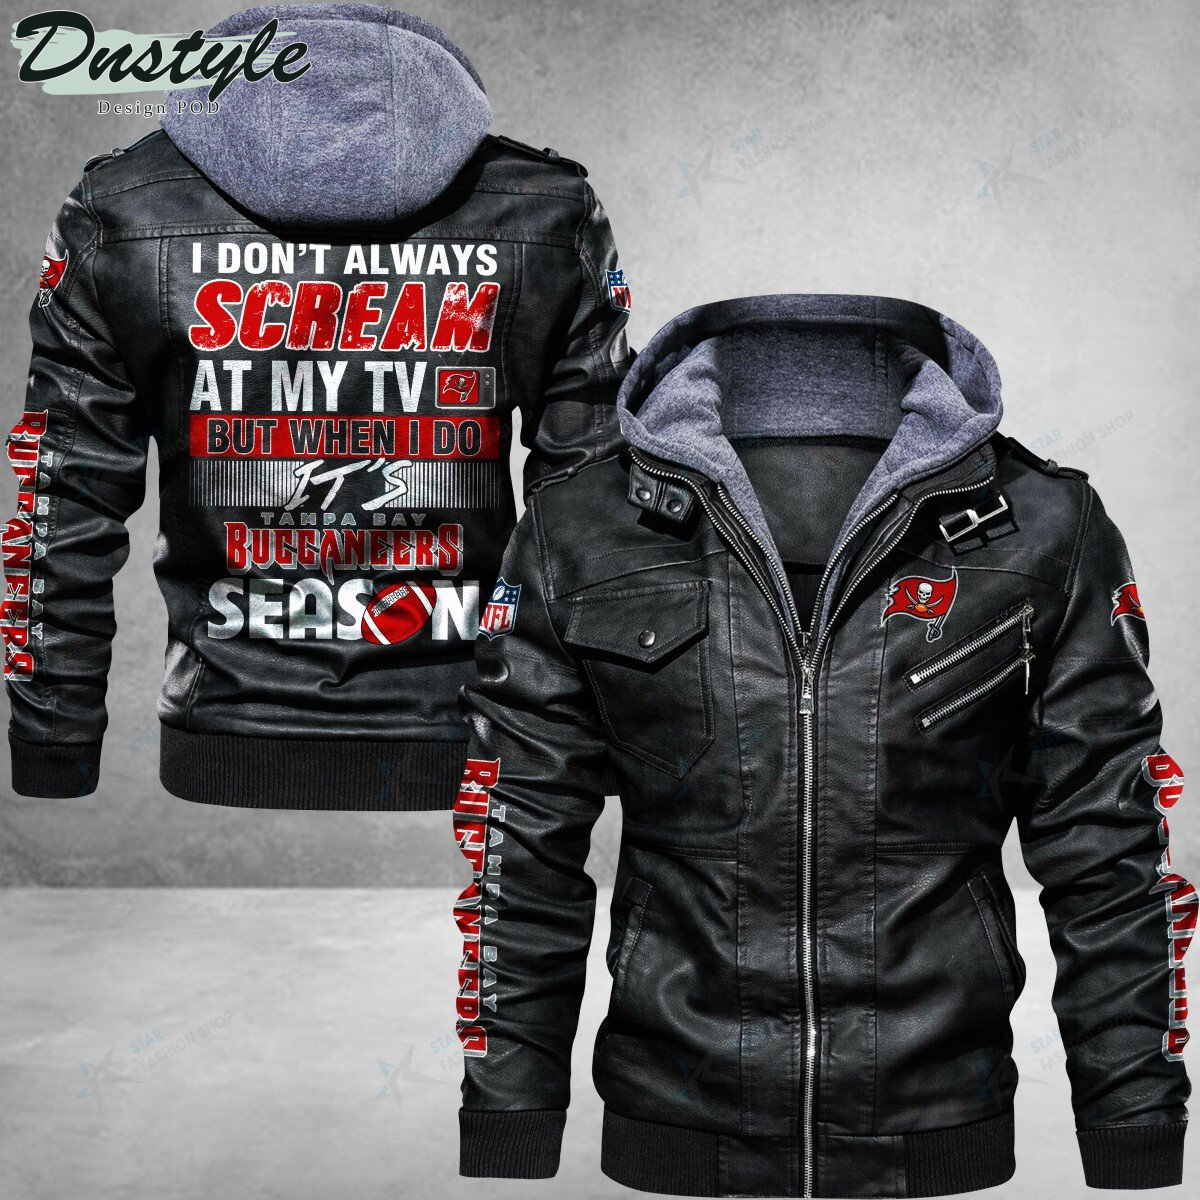 Tampa Bay Buccaneers I don’t Always Scream At My TV Leather Jacket